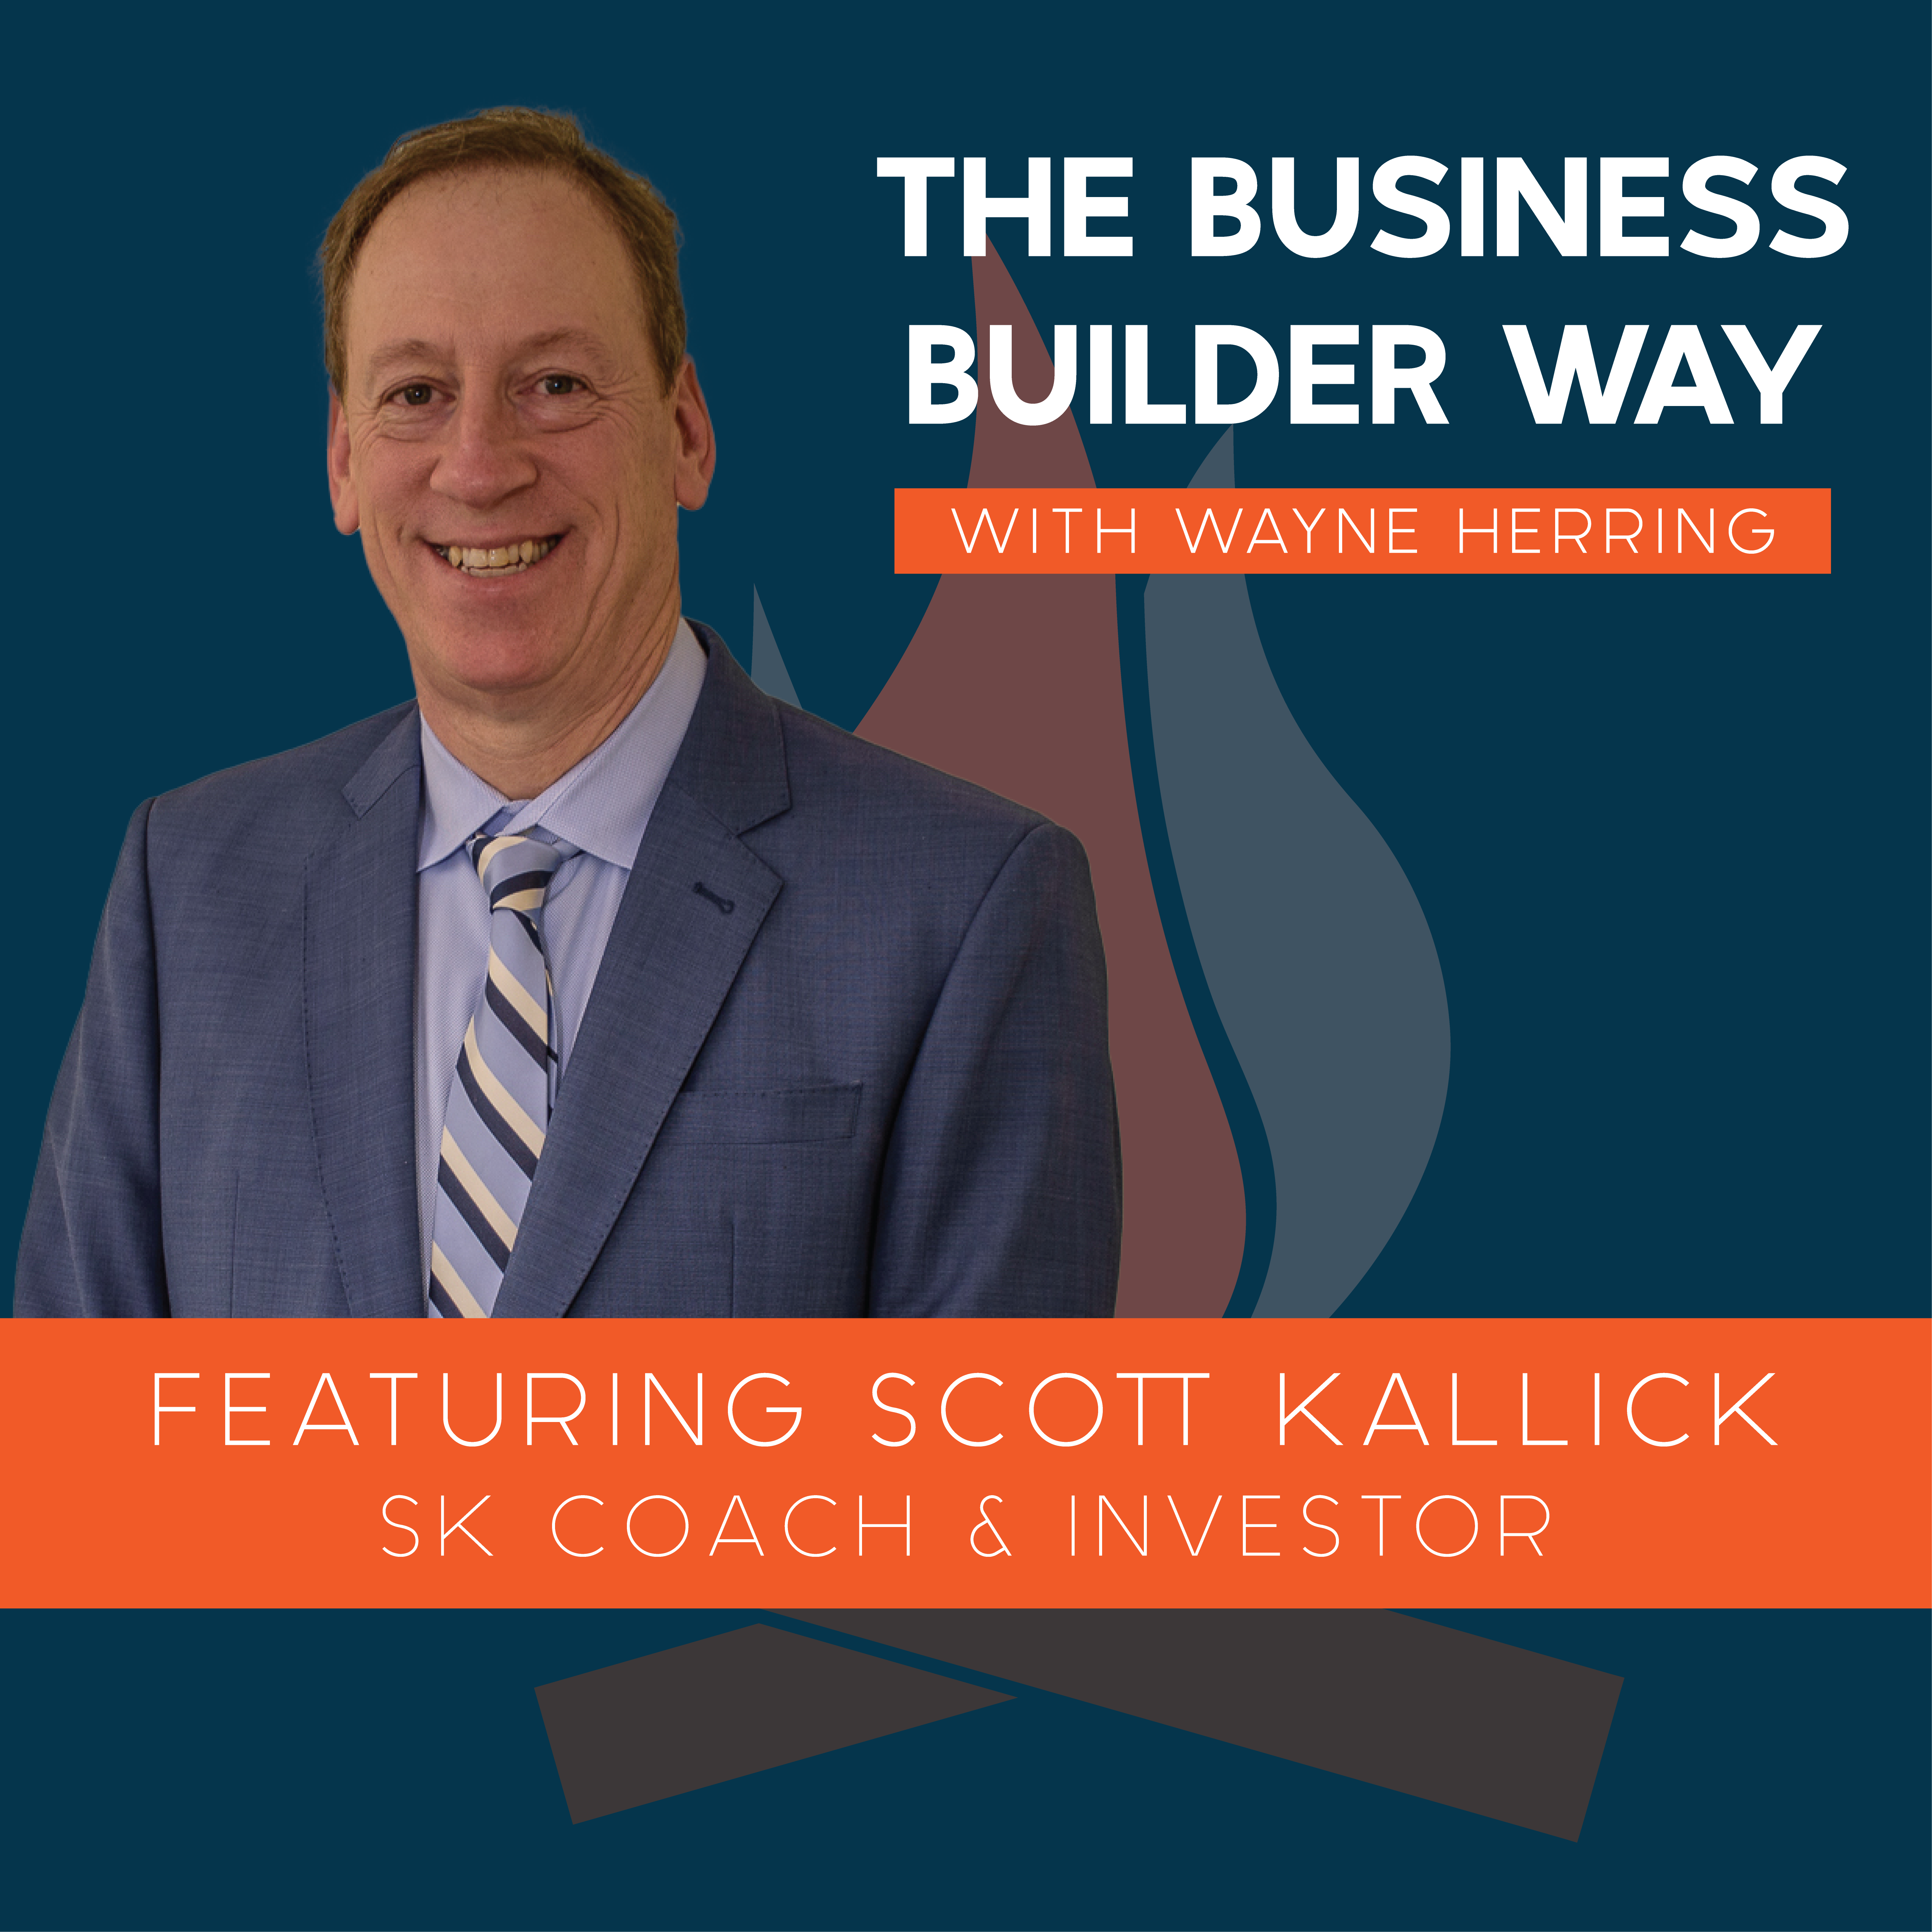 Business Builder Way Podcast image featuring Scott Kallick a SK coach and investor.